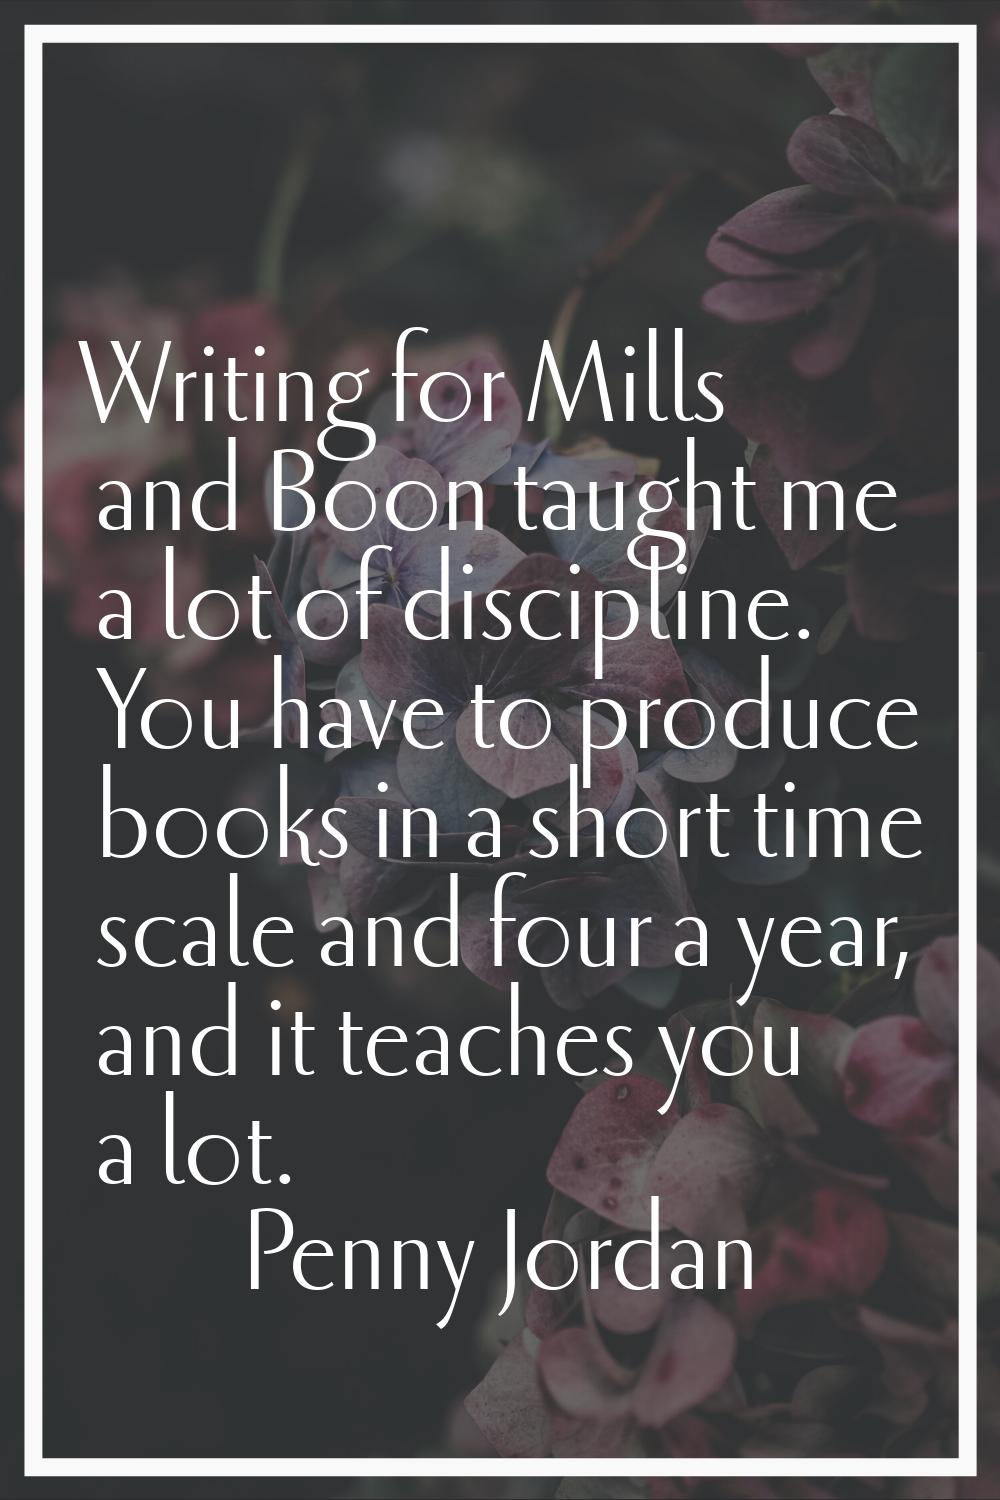 Writing for Mills and Boon taught me a lot of discipline. You have to produce books in a short time